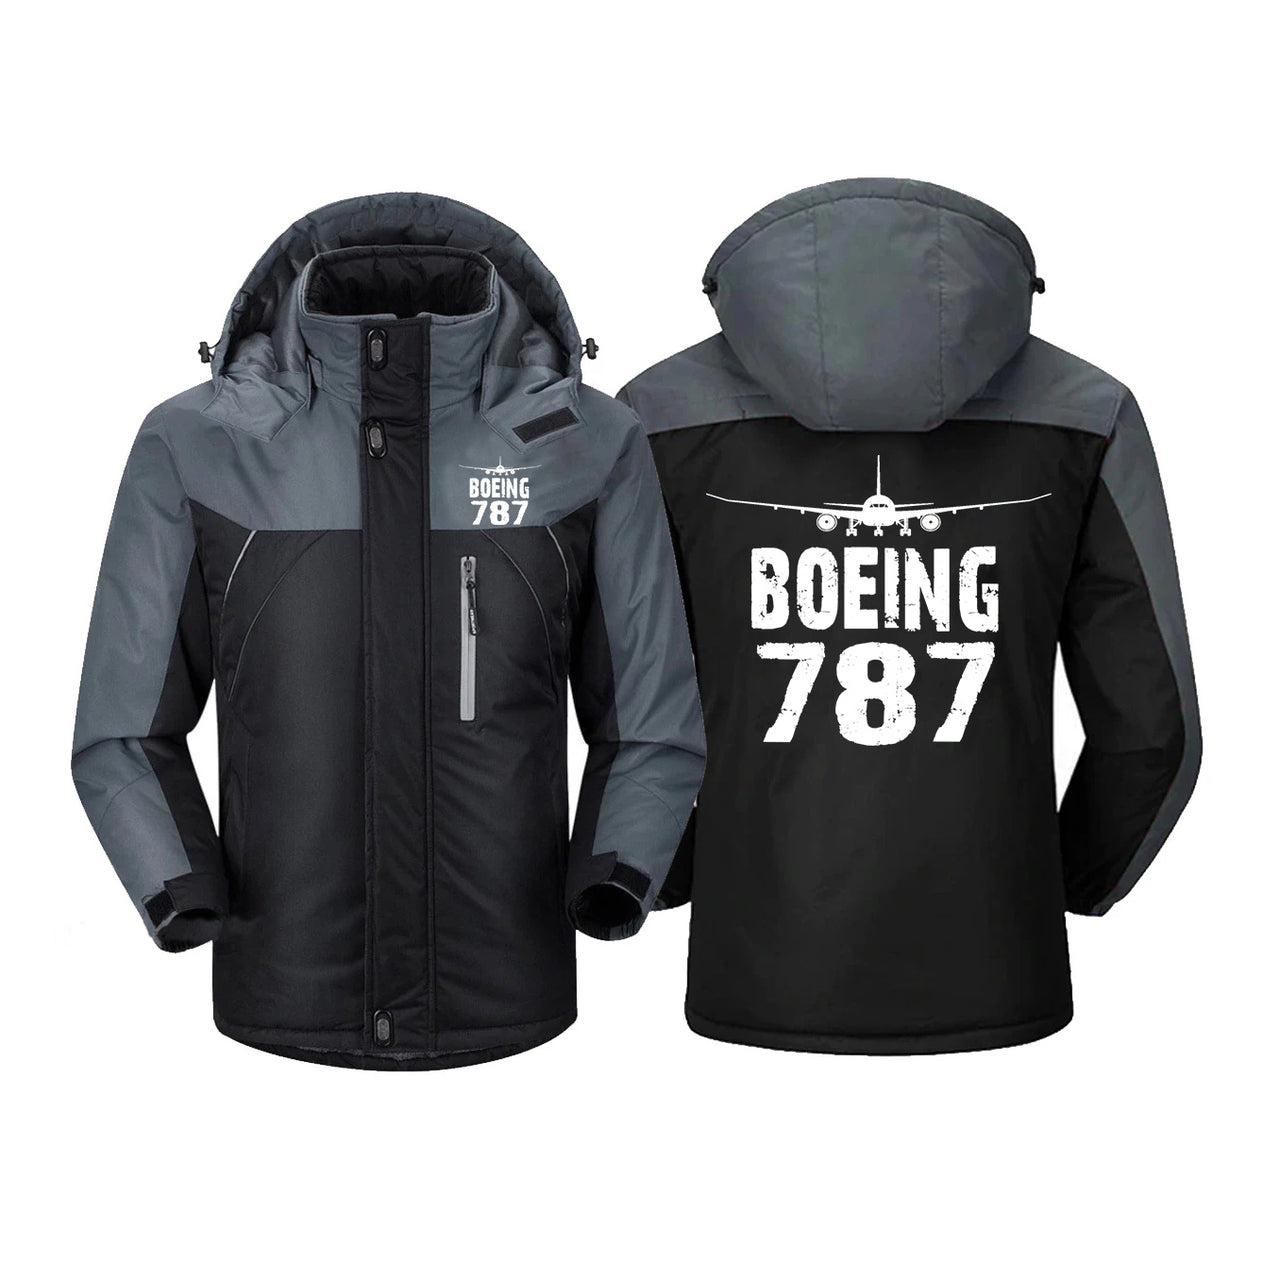 Boeing 787 & Plane Designed Thick Winter Jackets